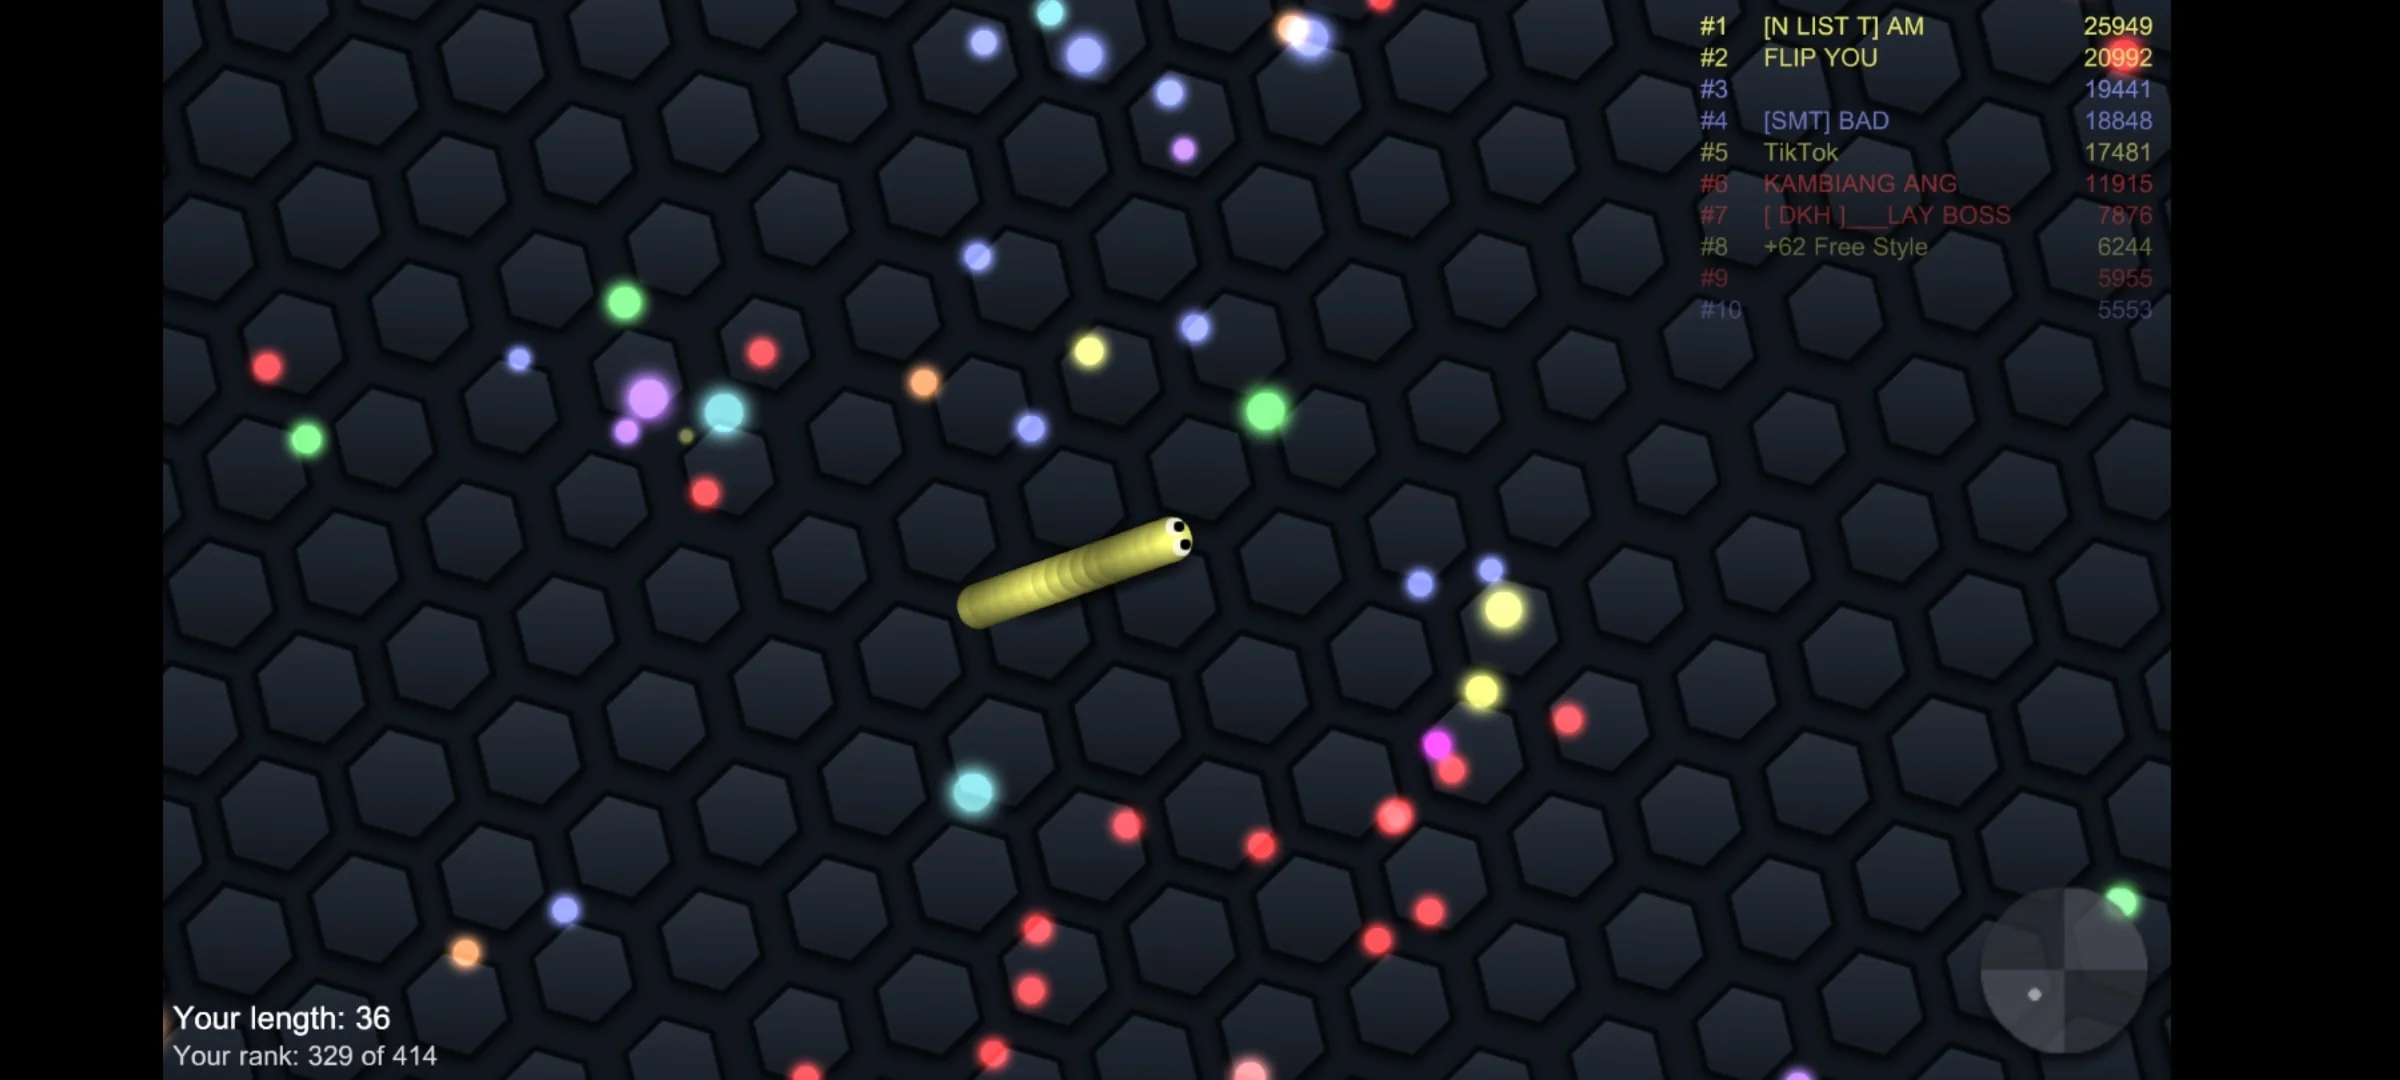 Slither io Mod Apk v1.8.5 God Mode Download Android - Slither io